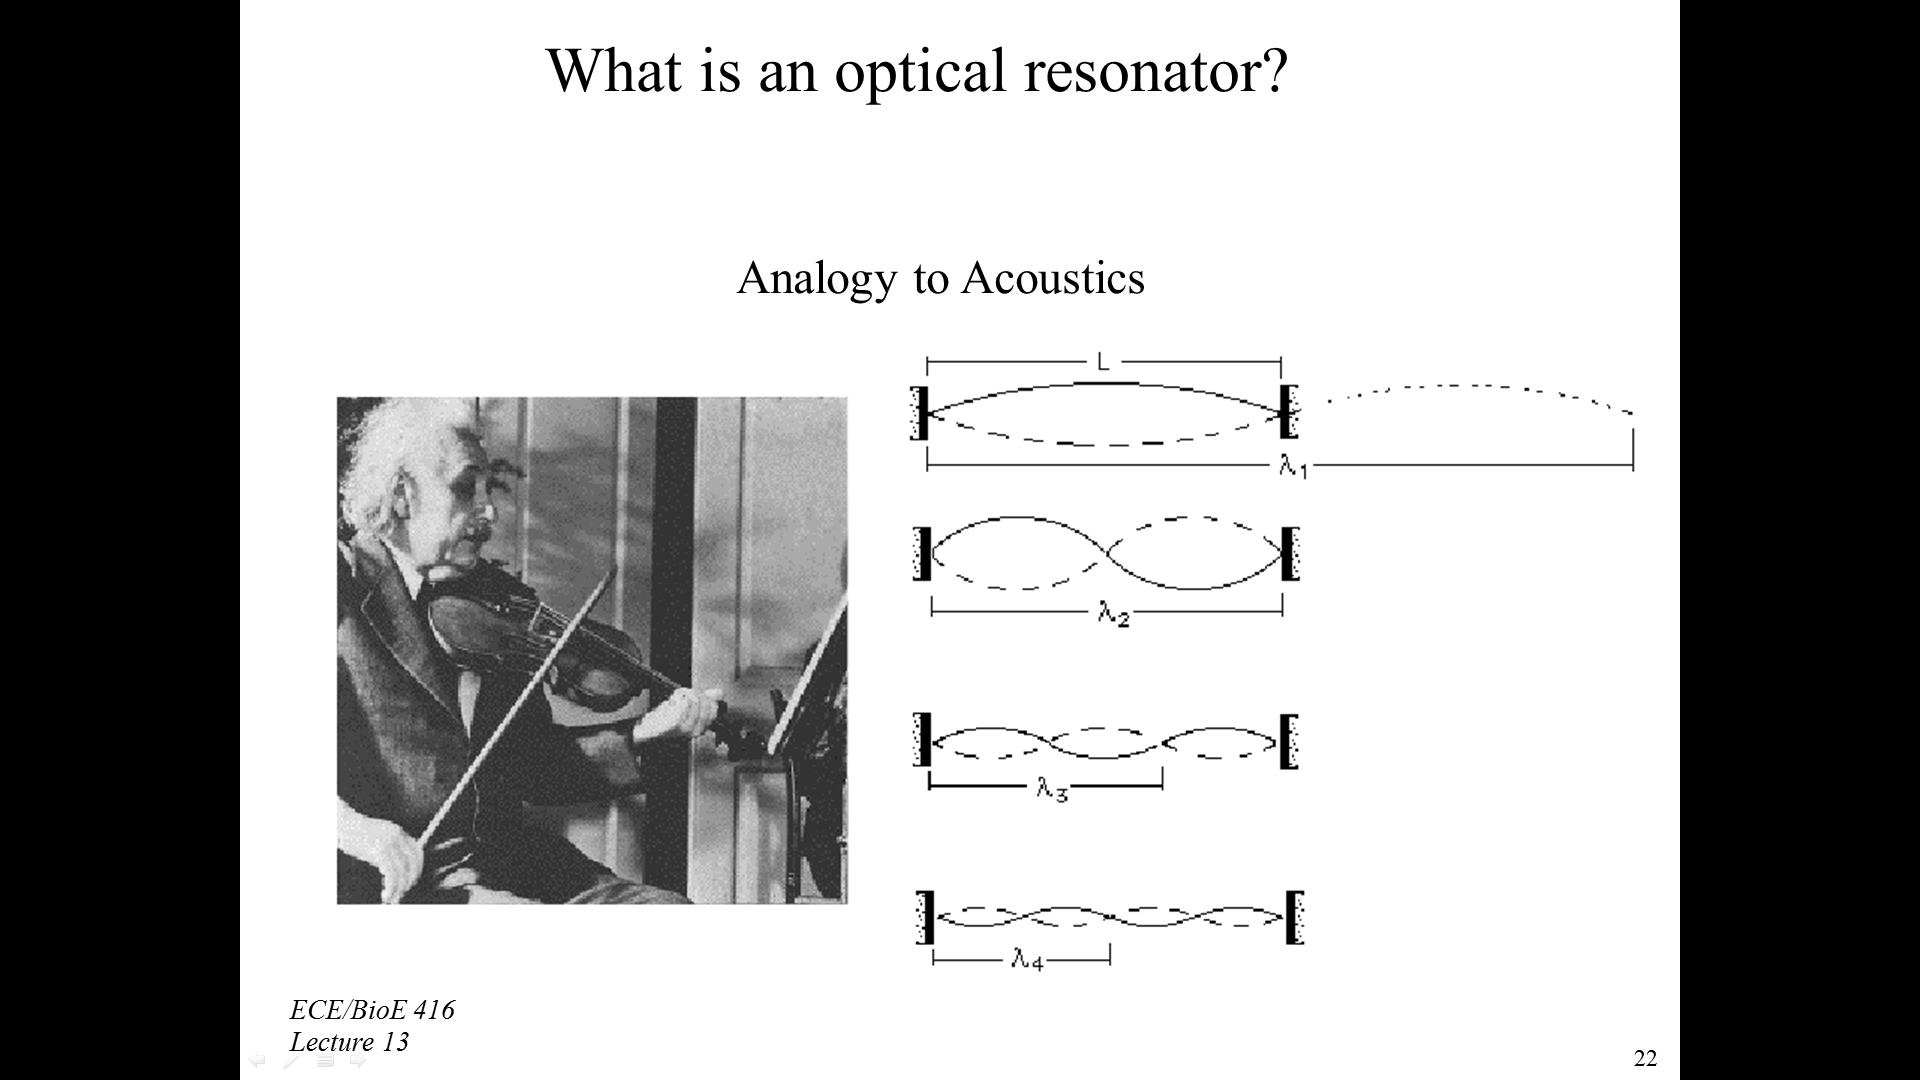 What is an optical resonator?